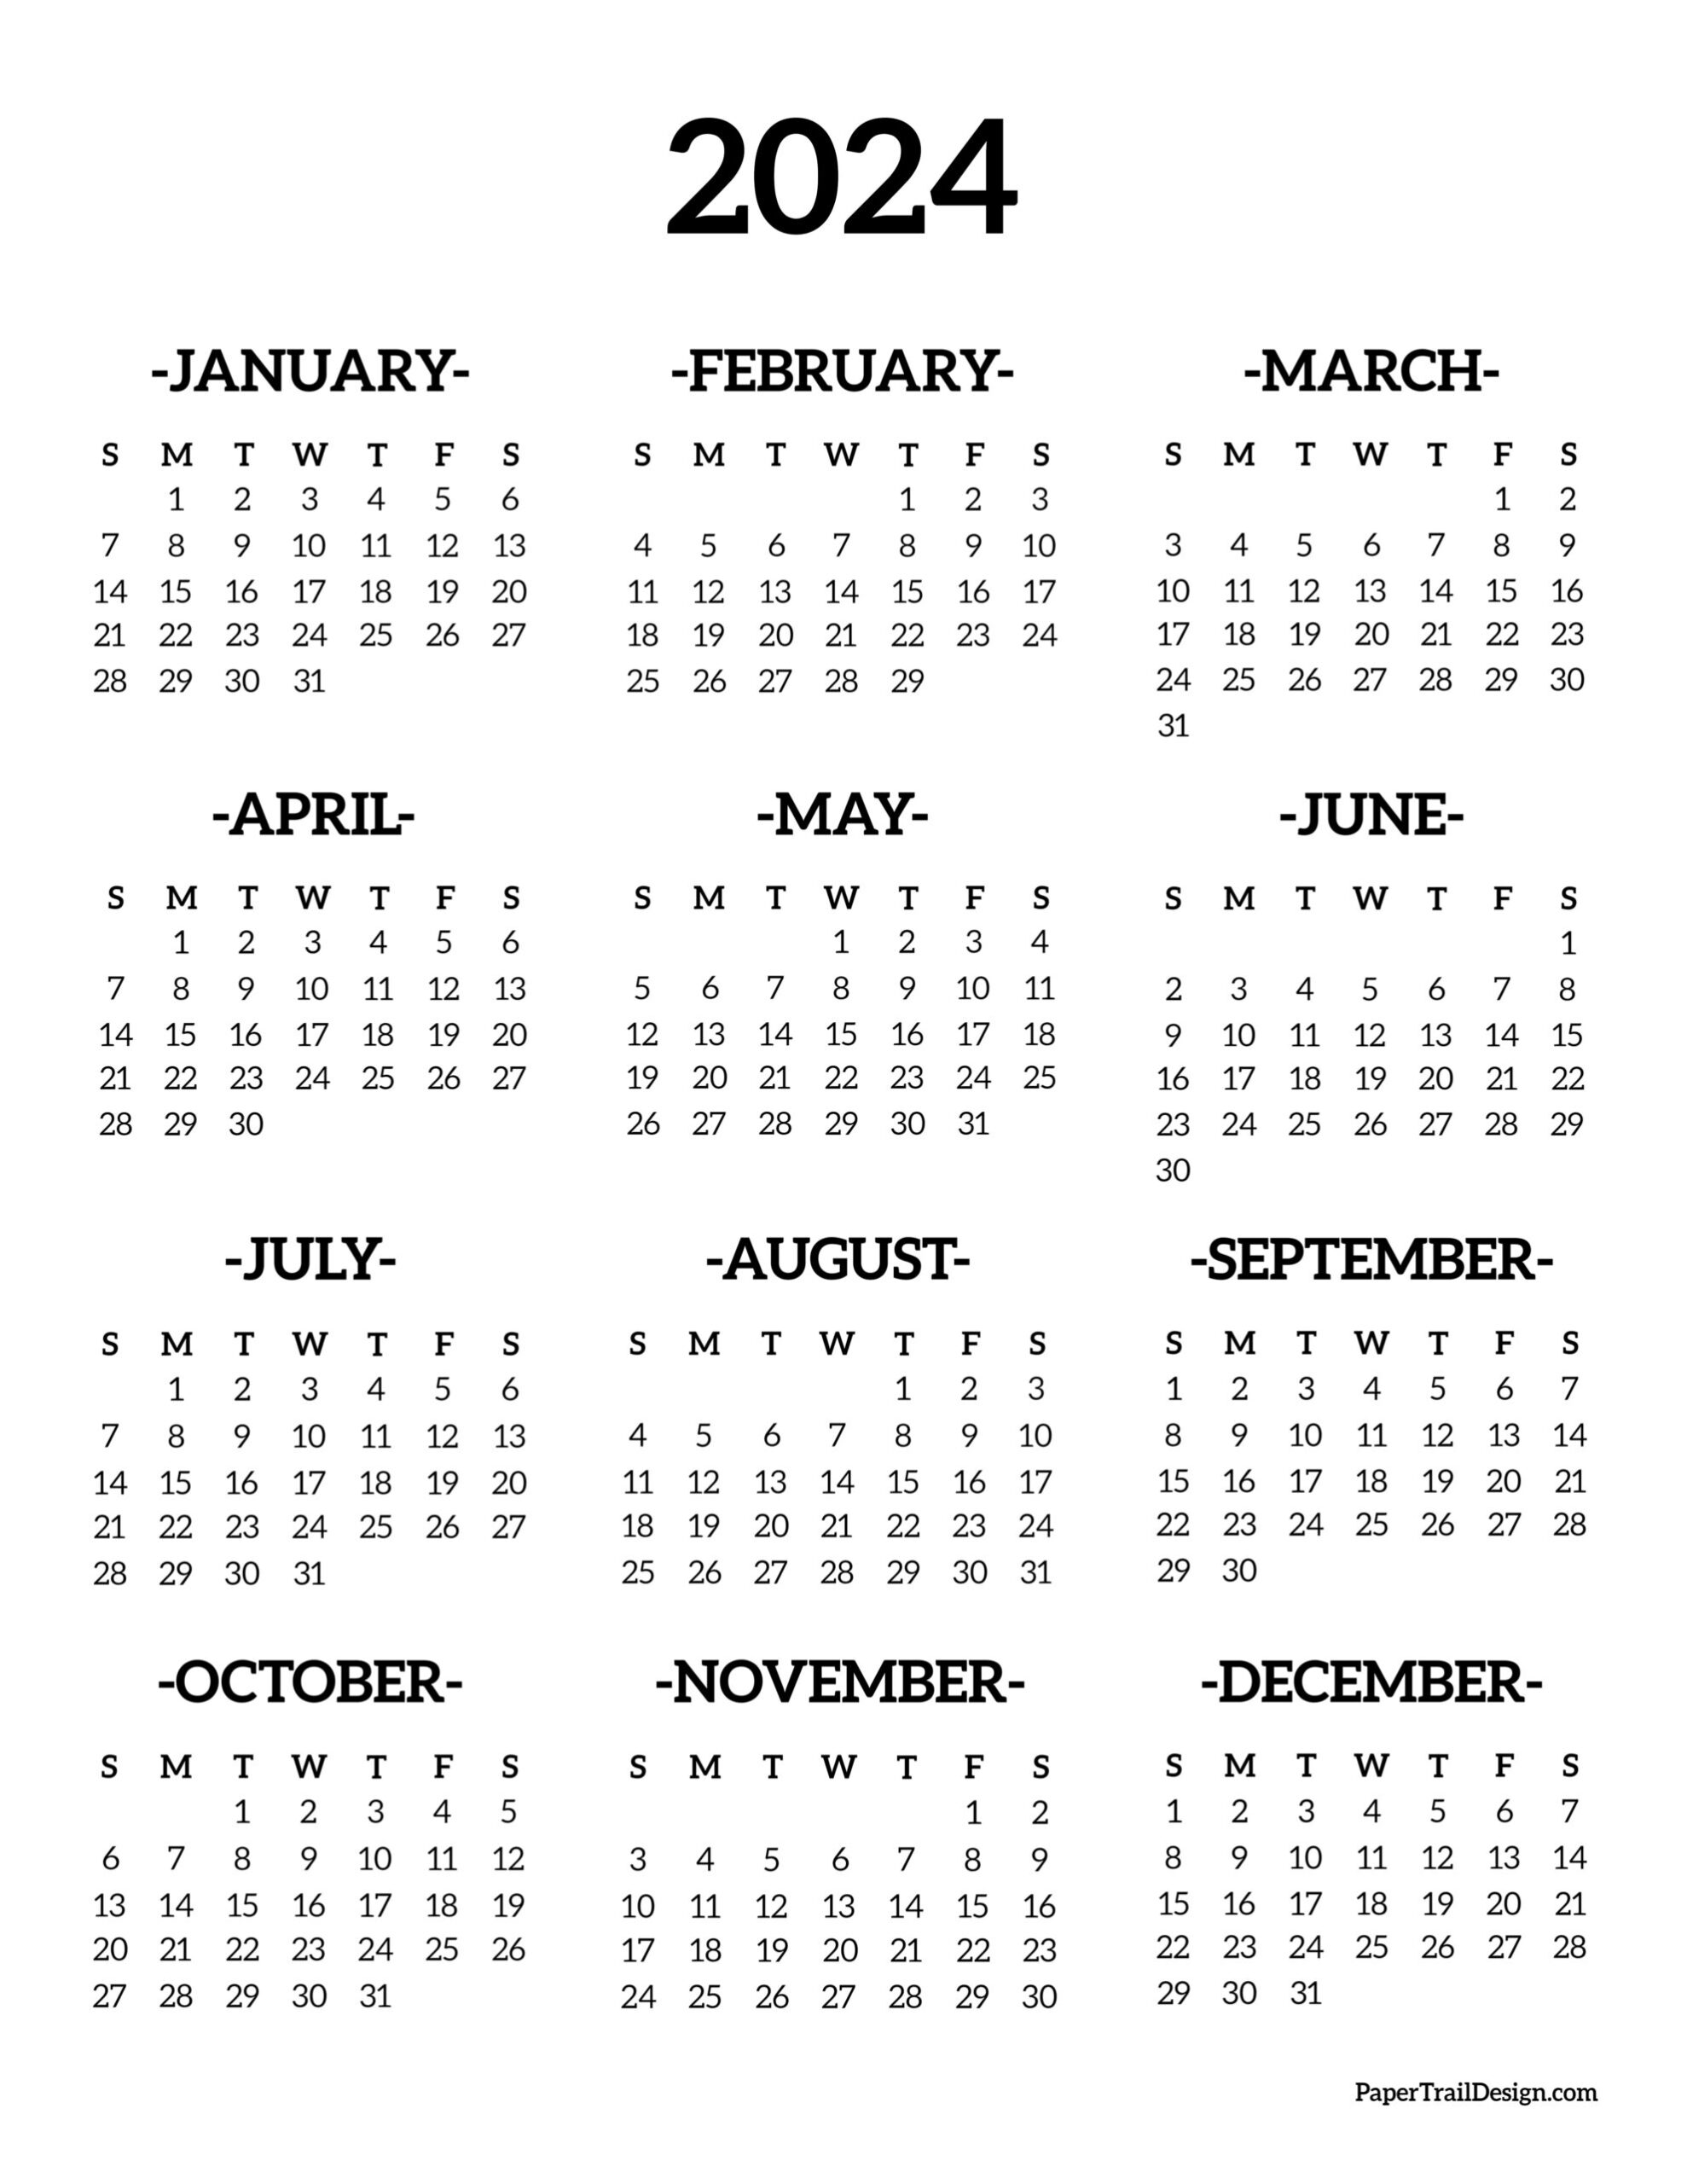 Calendar 2024 Printable One Page - Paper Trail Design for 2024 Yearly Printable Calendar Free